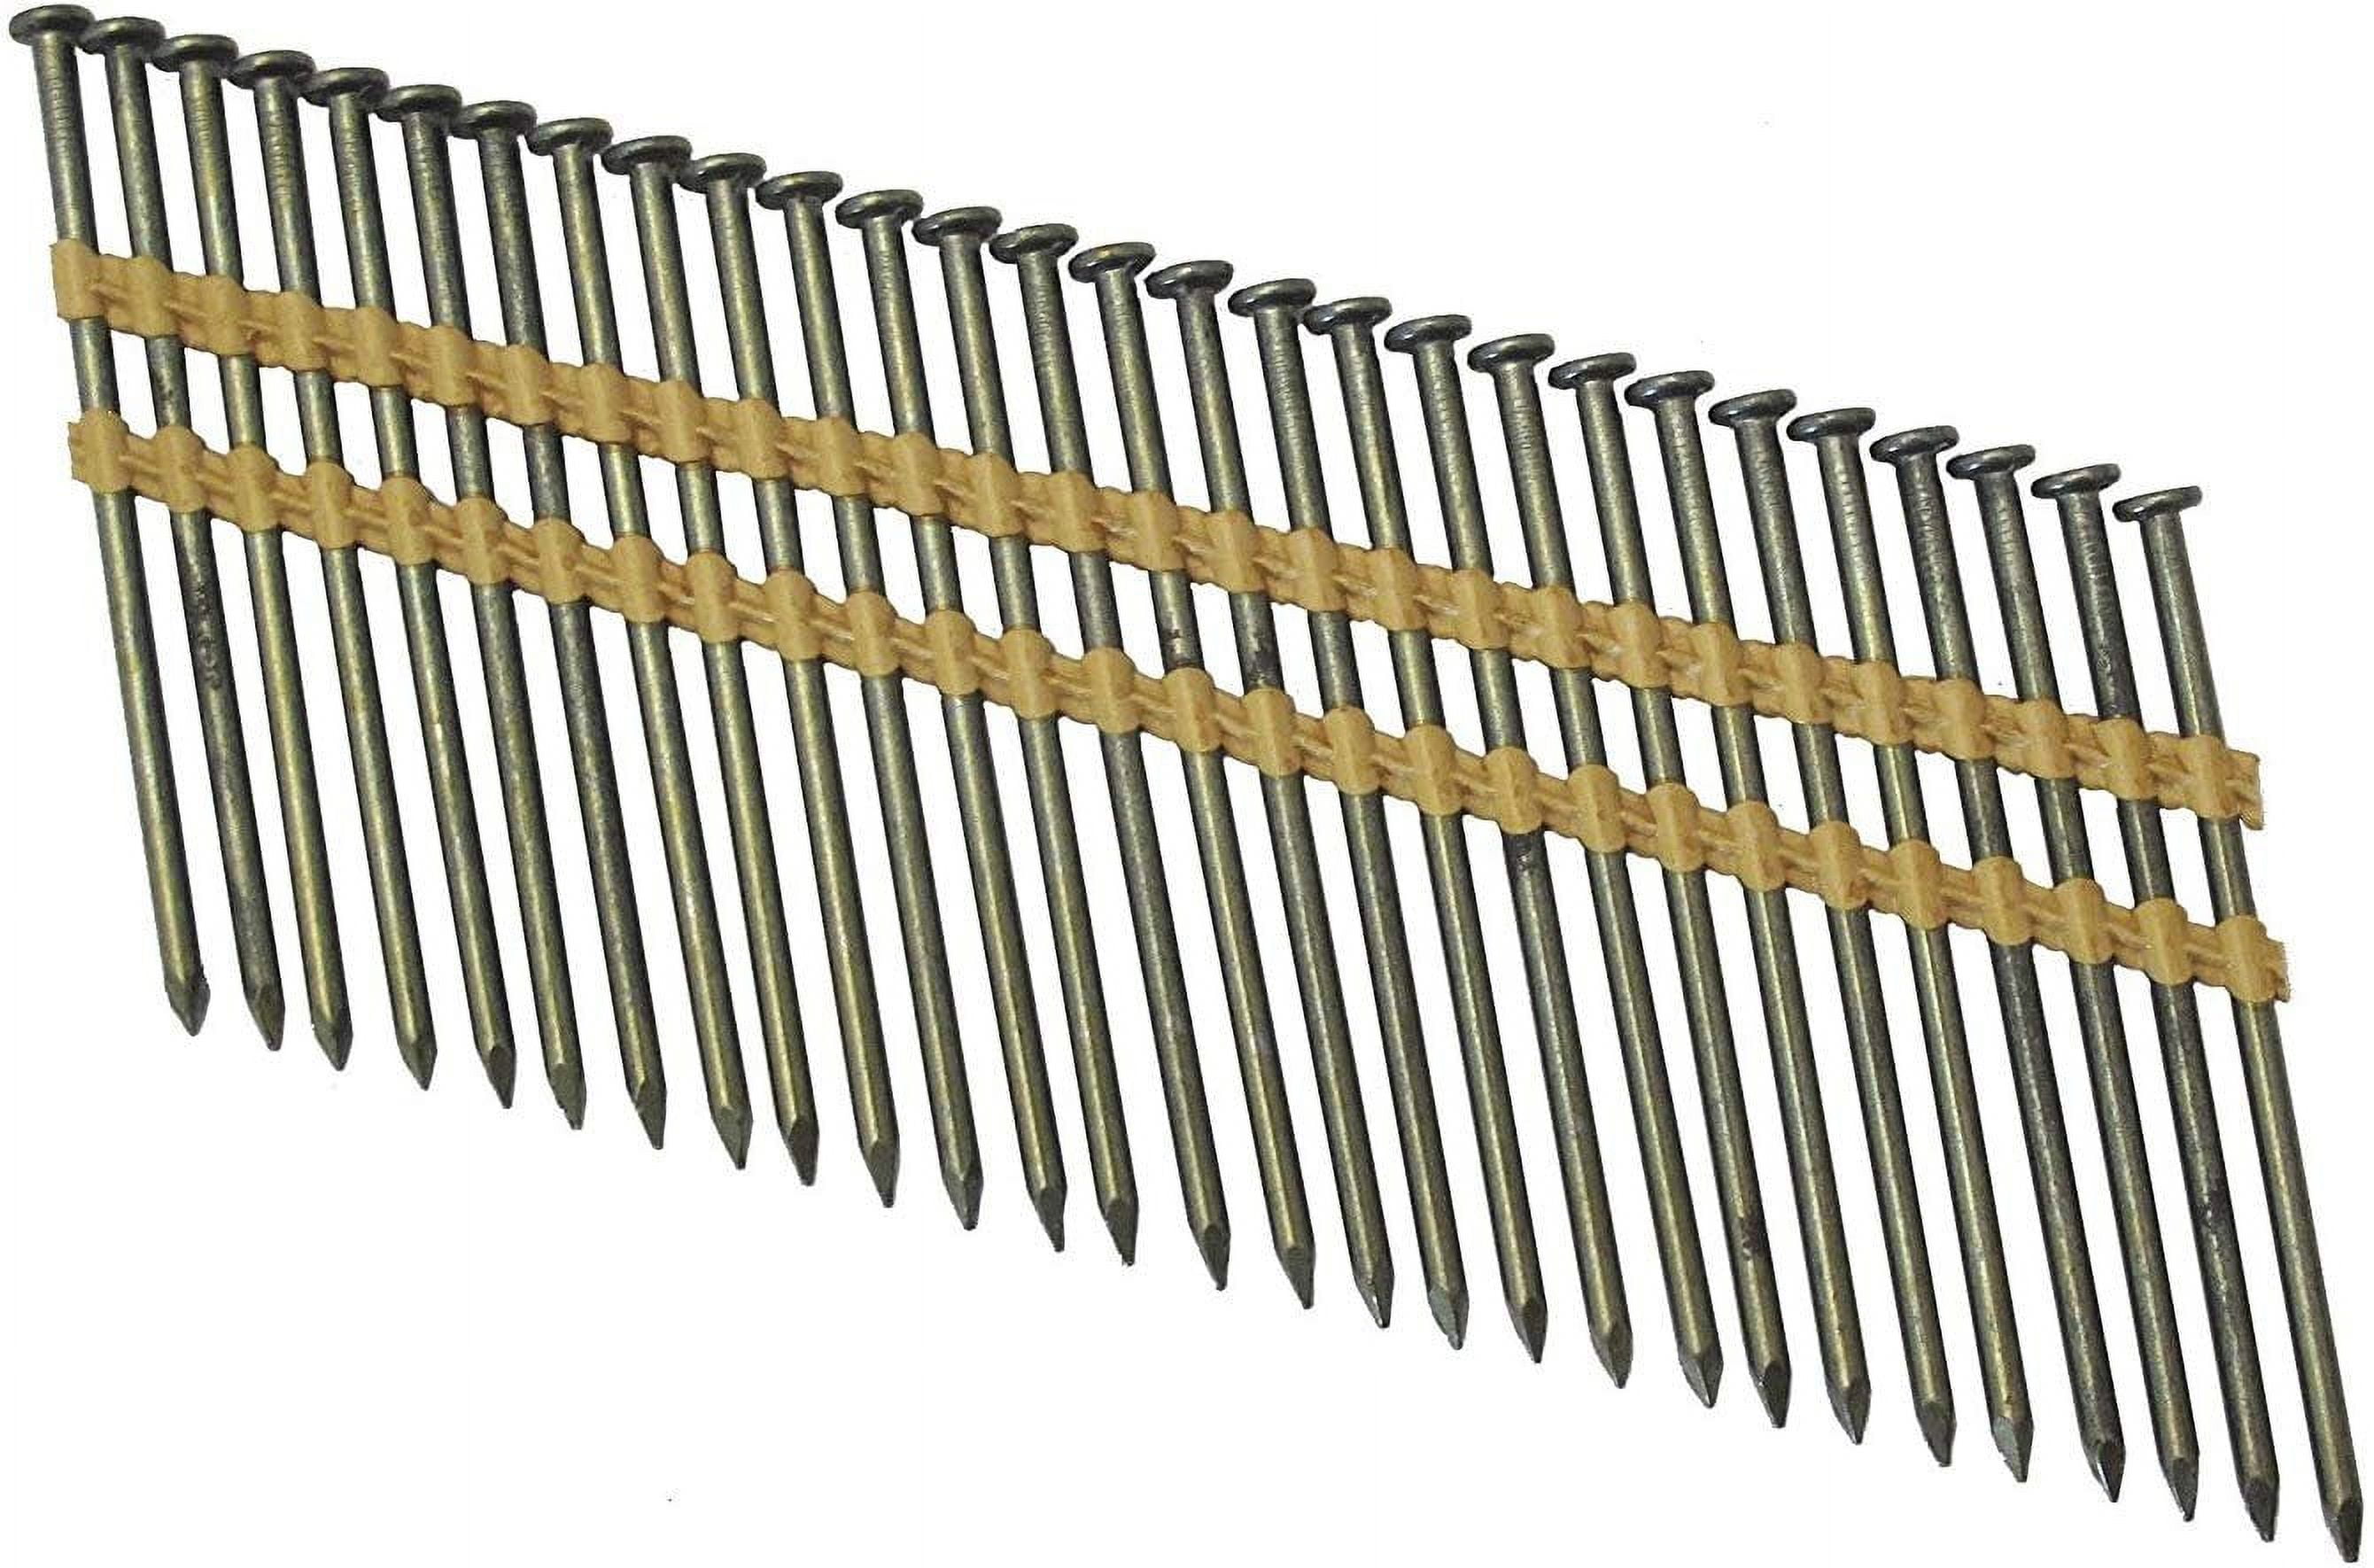 3 Inch Nails Suppliers | 3 Inch Nails विक्रेता and आपूर्तिकर्ता | Suppliers  of 3 Inch Nails